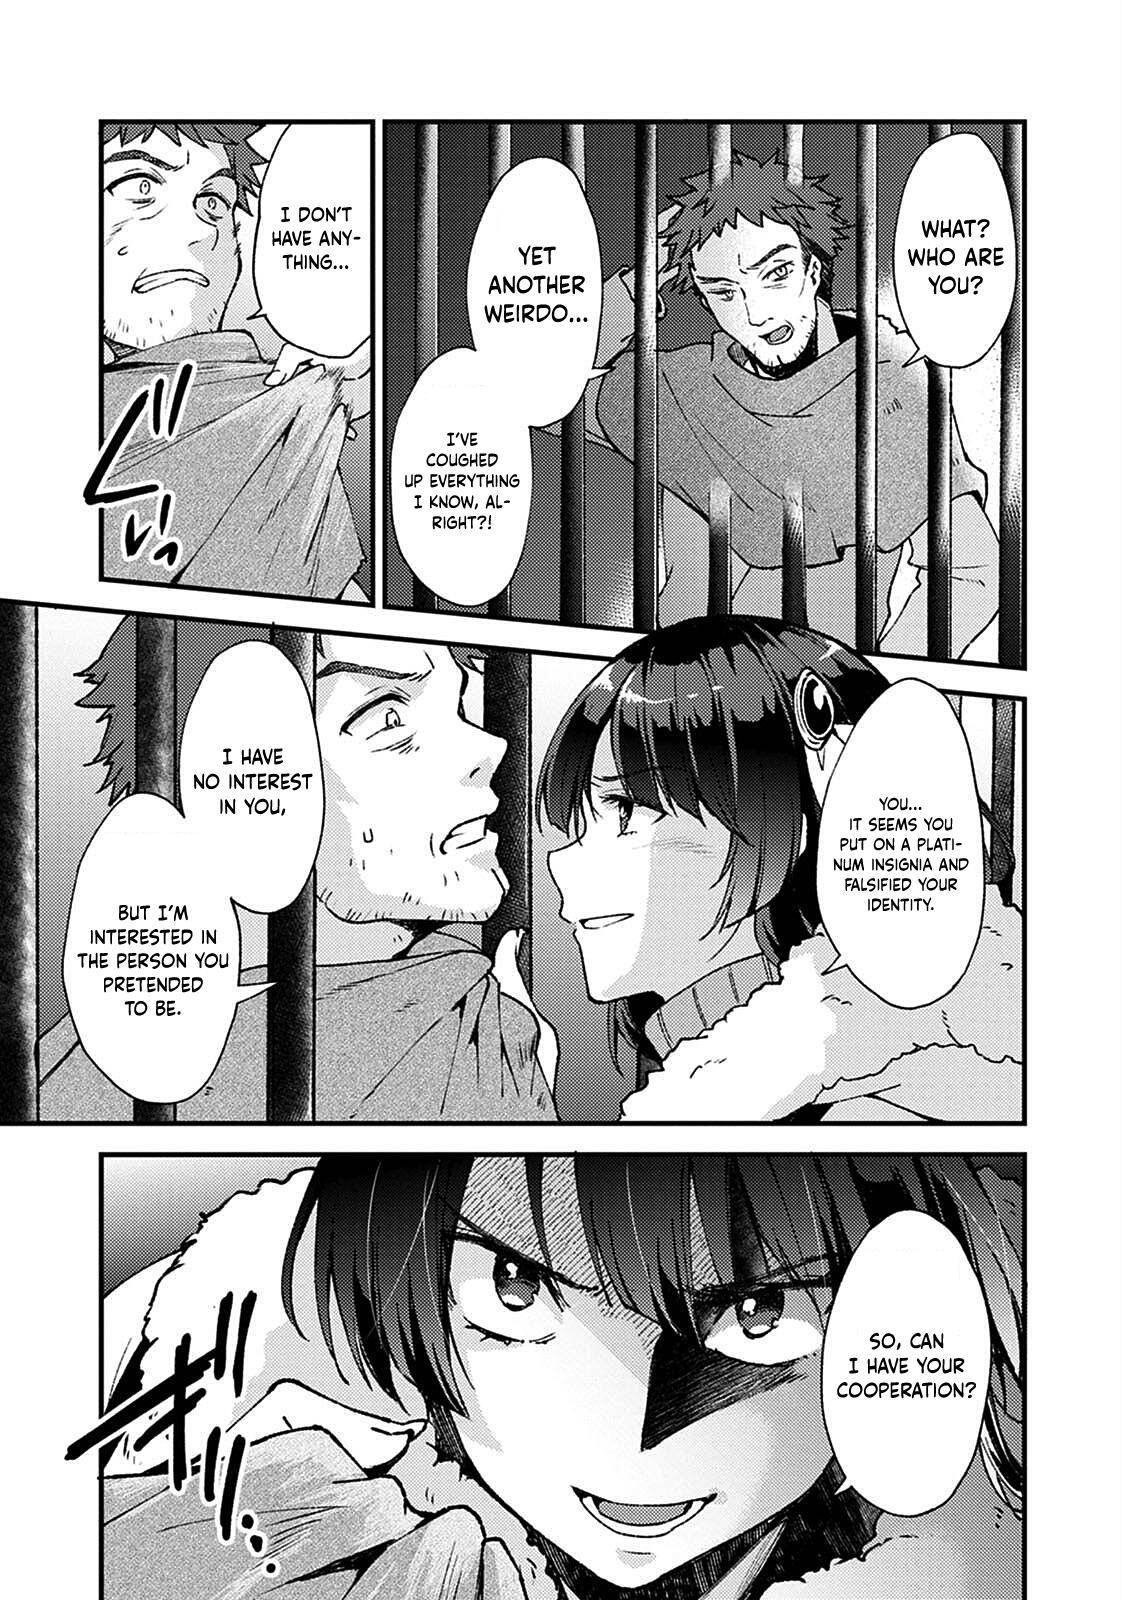 A Sword Master Childhood Friend Power Harassed Me Harshly - chapter 10 - #6